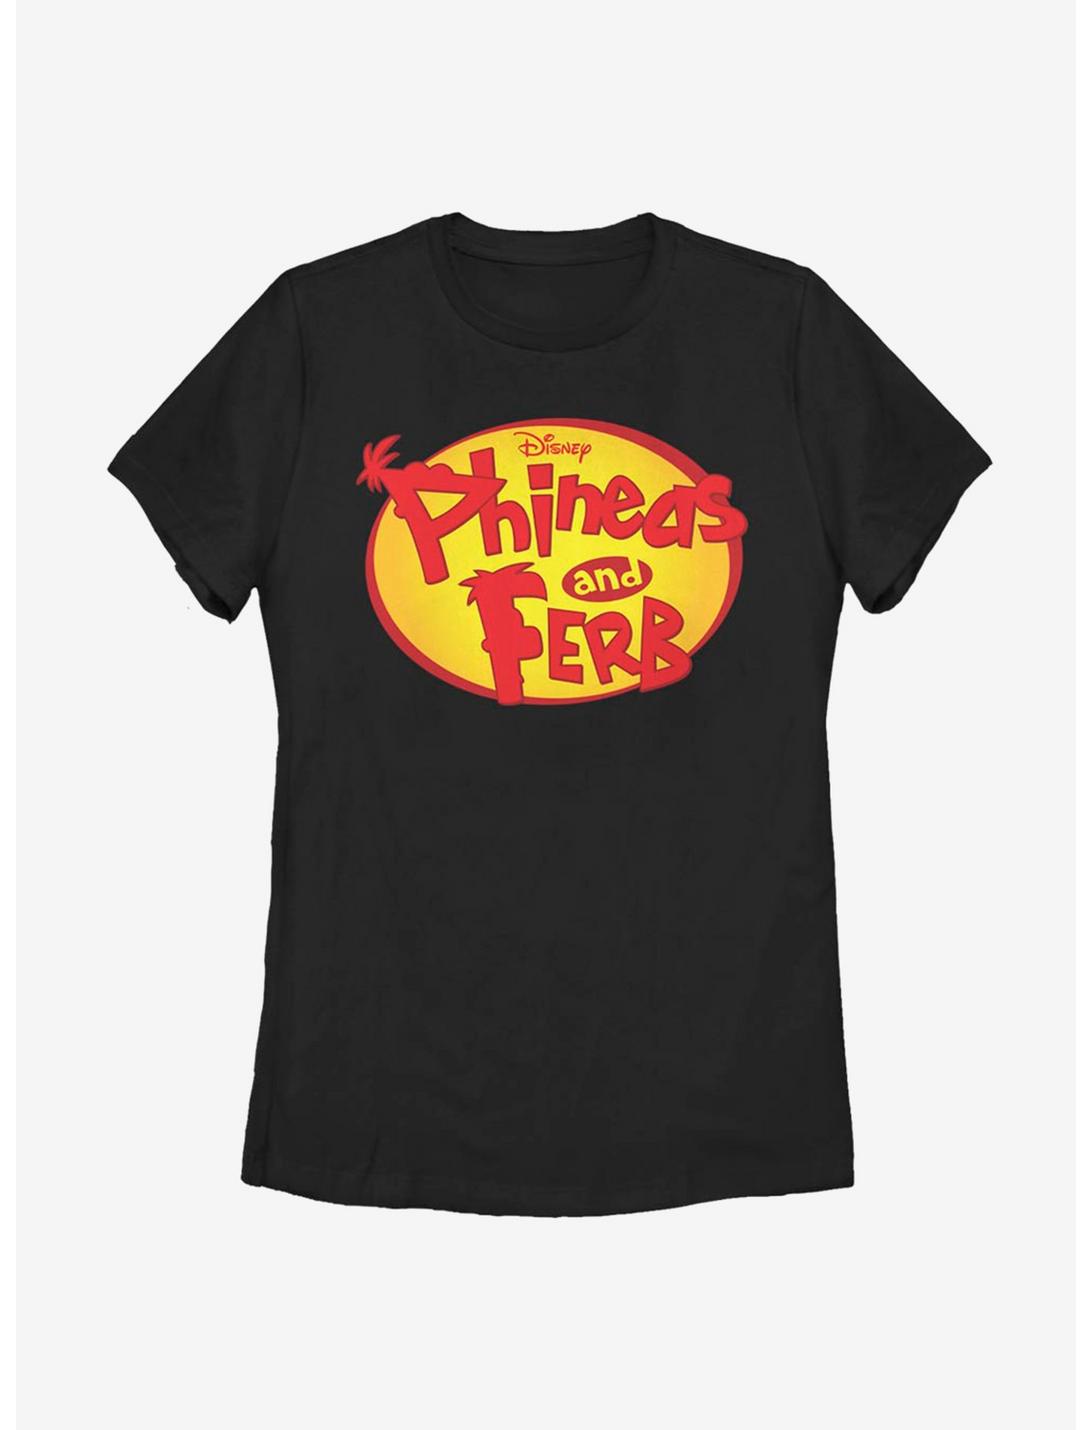 Disney Phineas And Ferb Oval Logo Womens T-Shirt, BLACK, hi-res